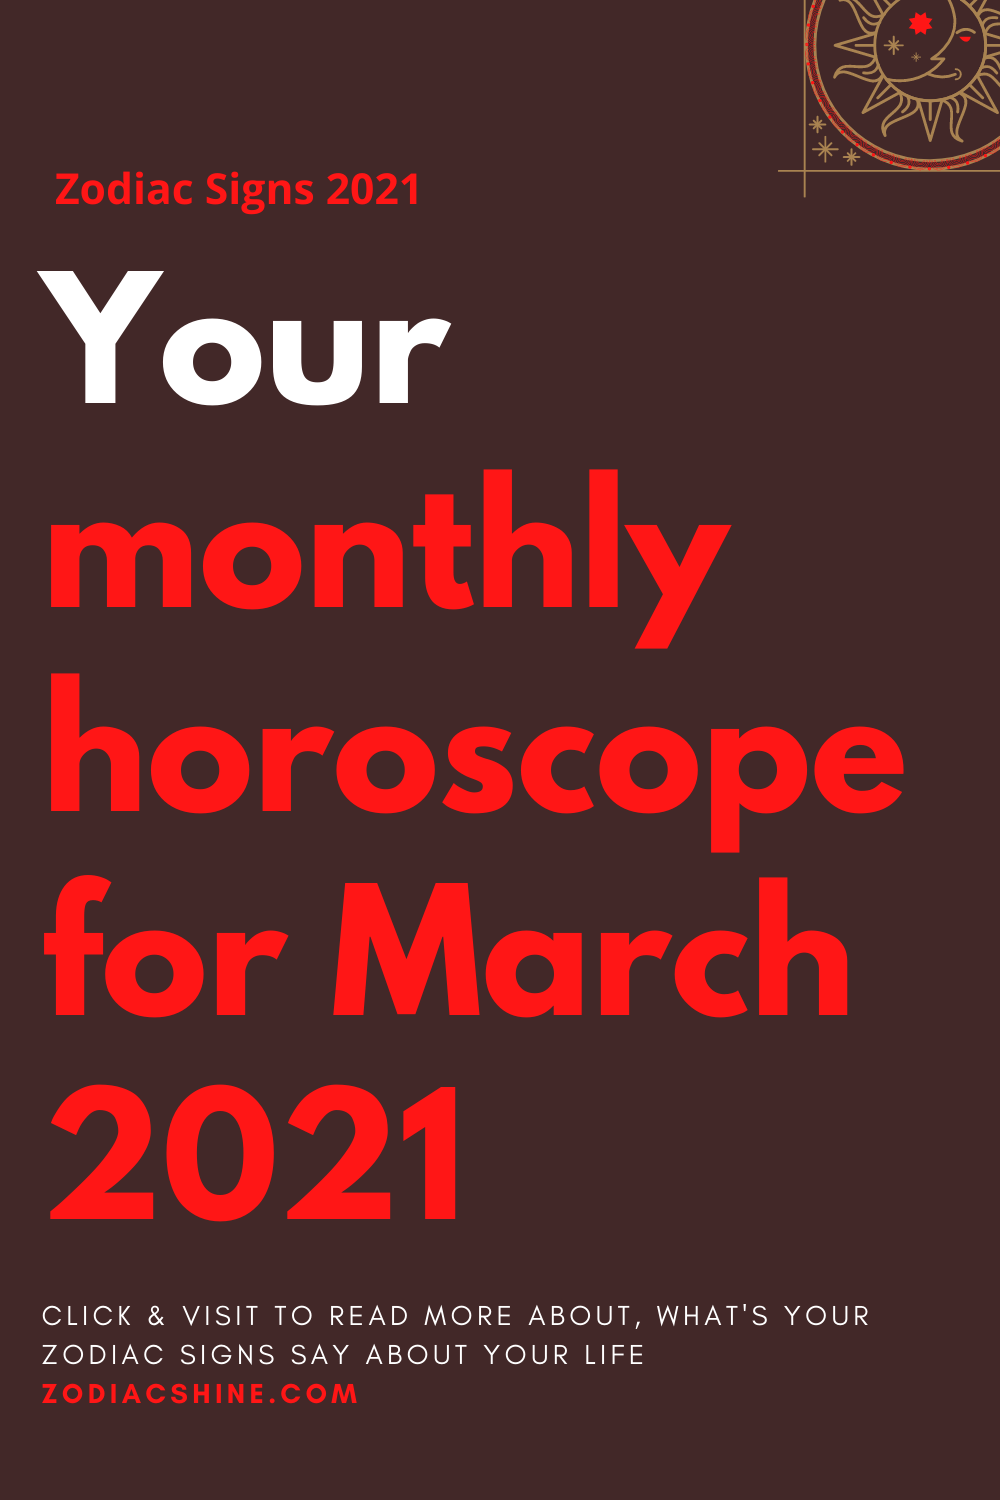 Your monthly horoscope for March 2021